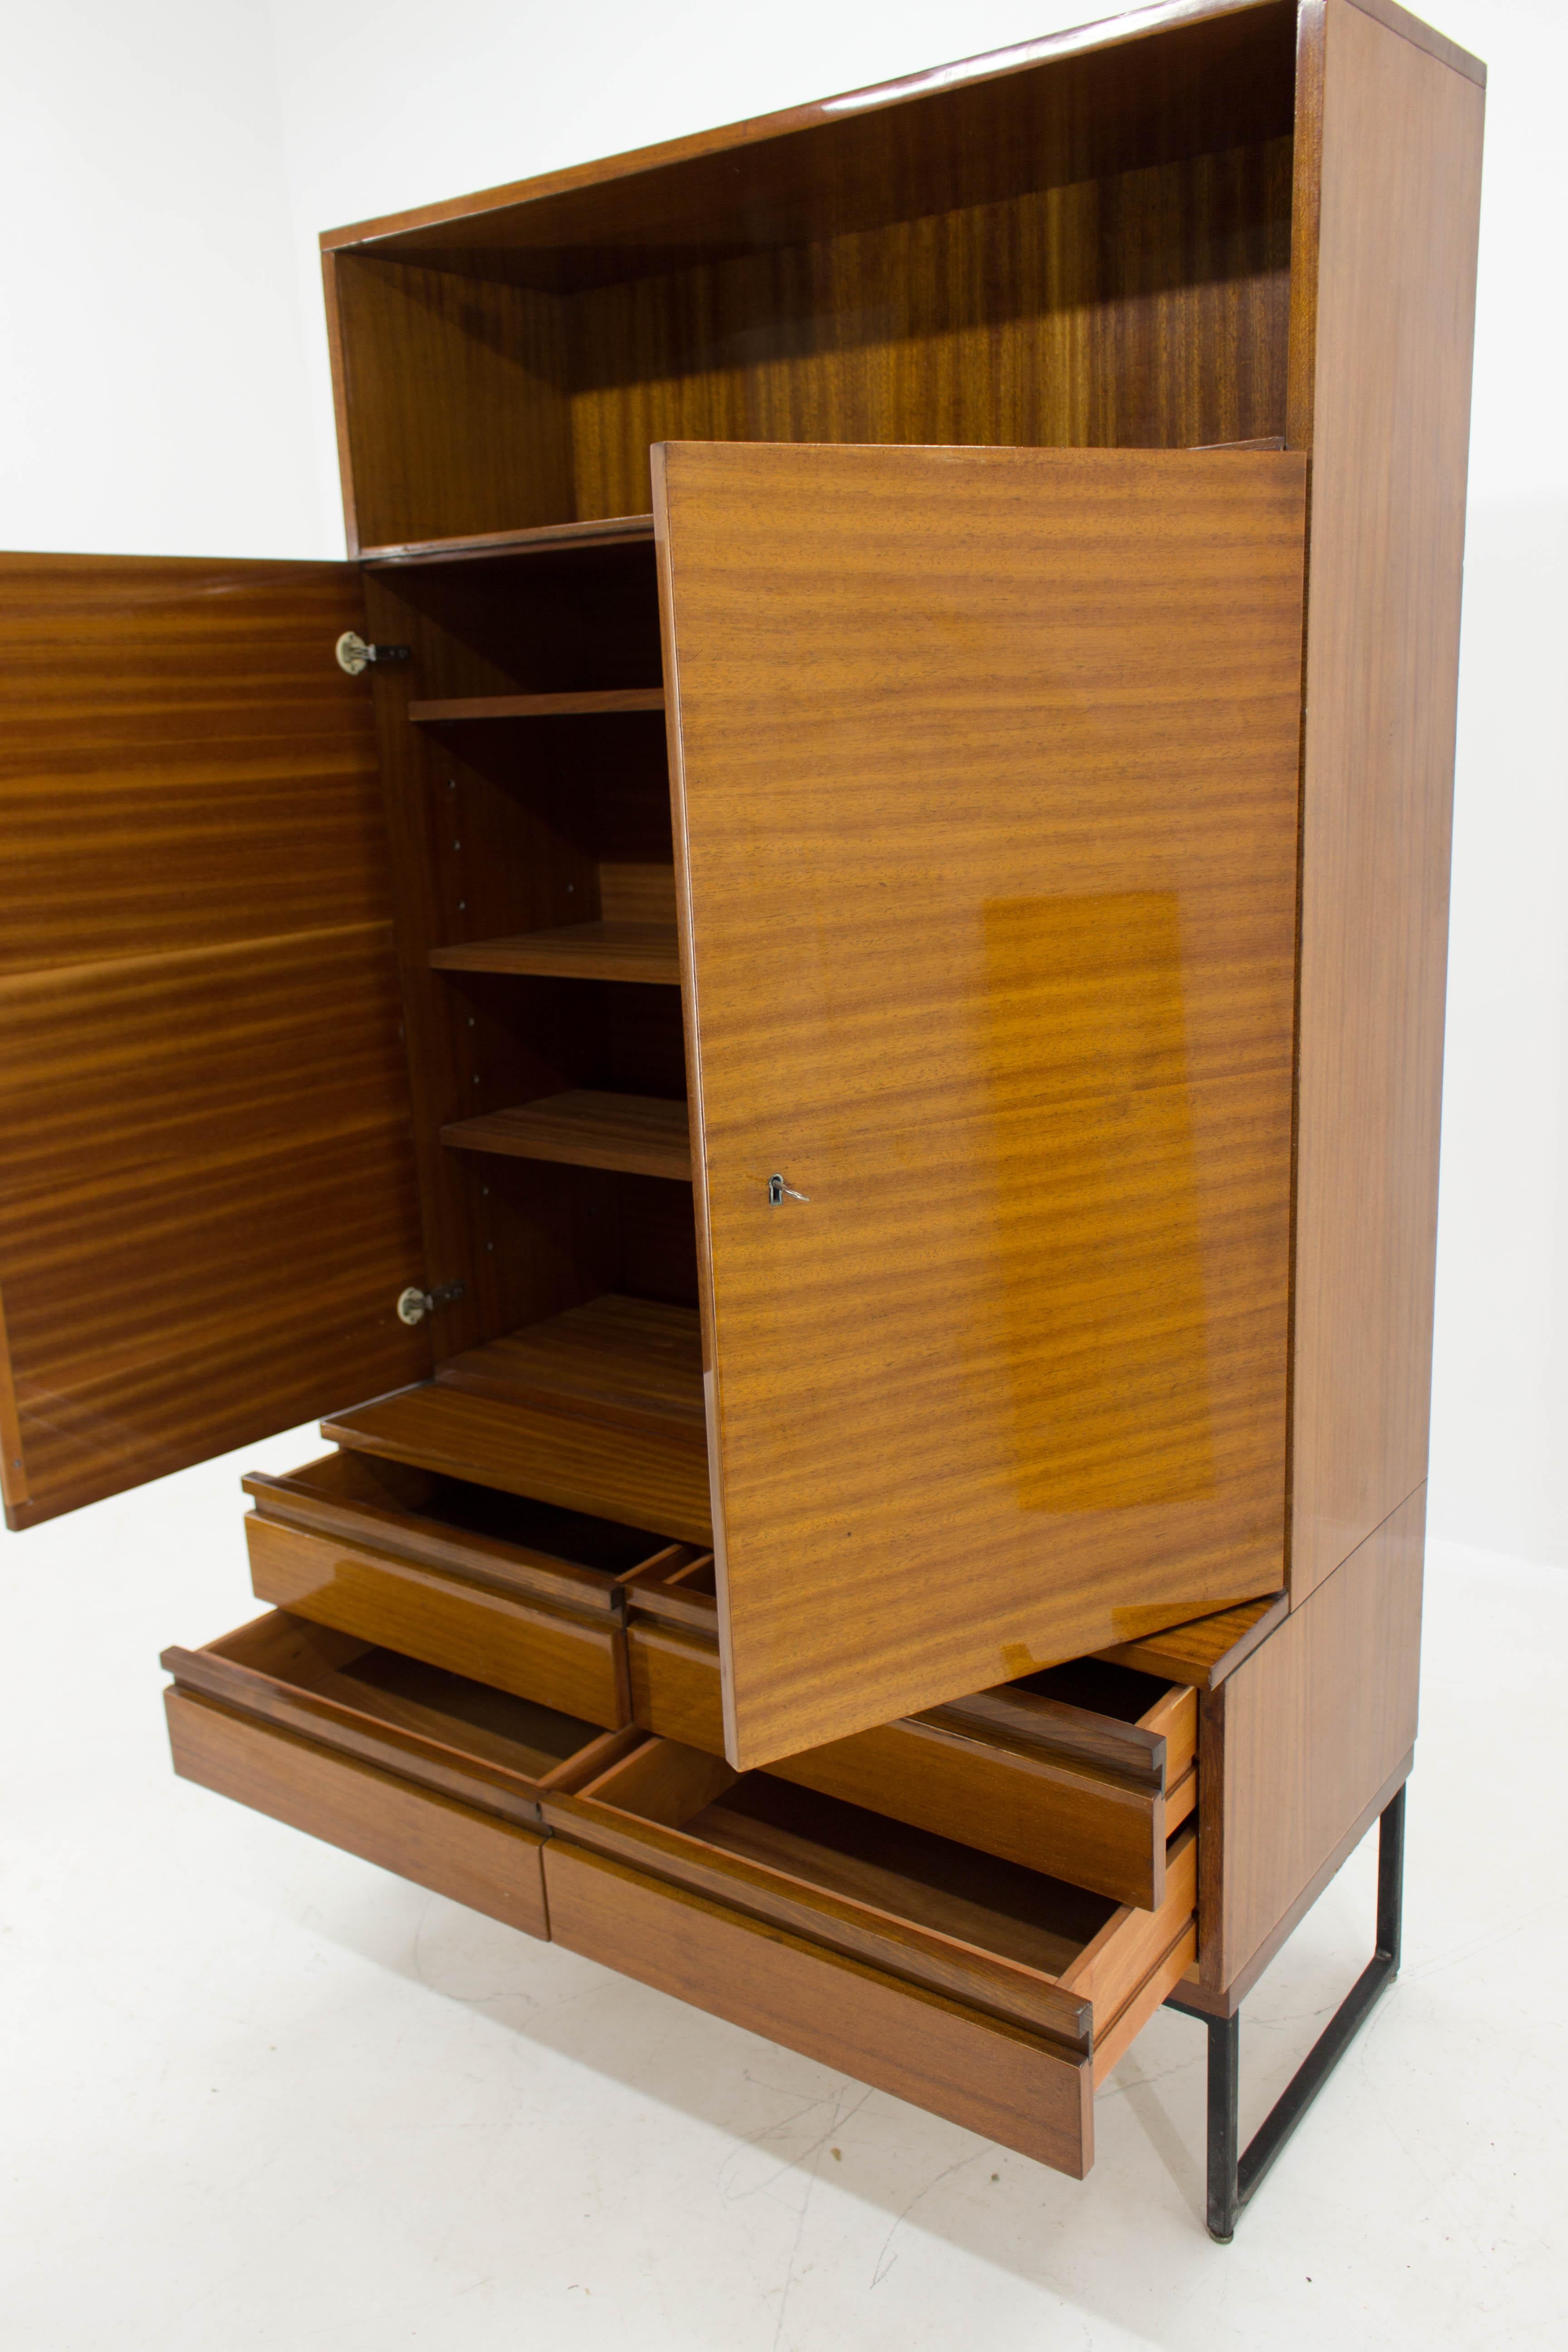 Steel Belmondo Cabinet with Shelves and Drawers in High Gloss Finish, 1970 For Sale